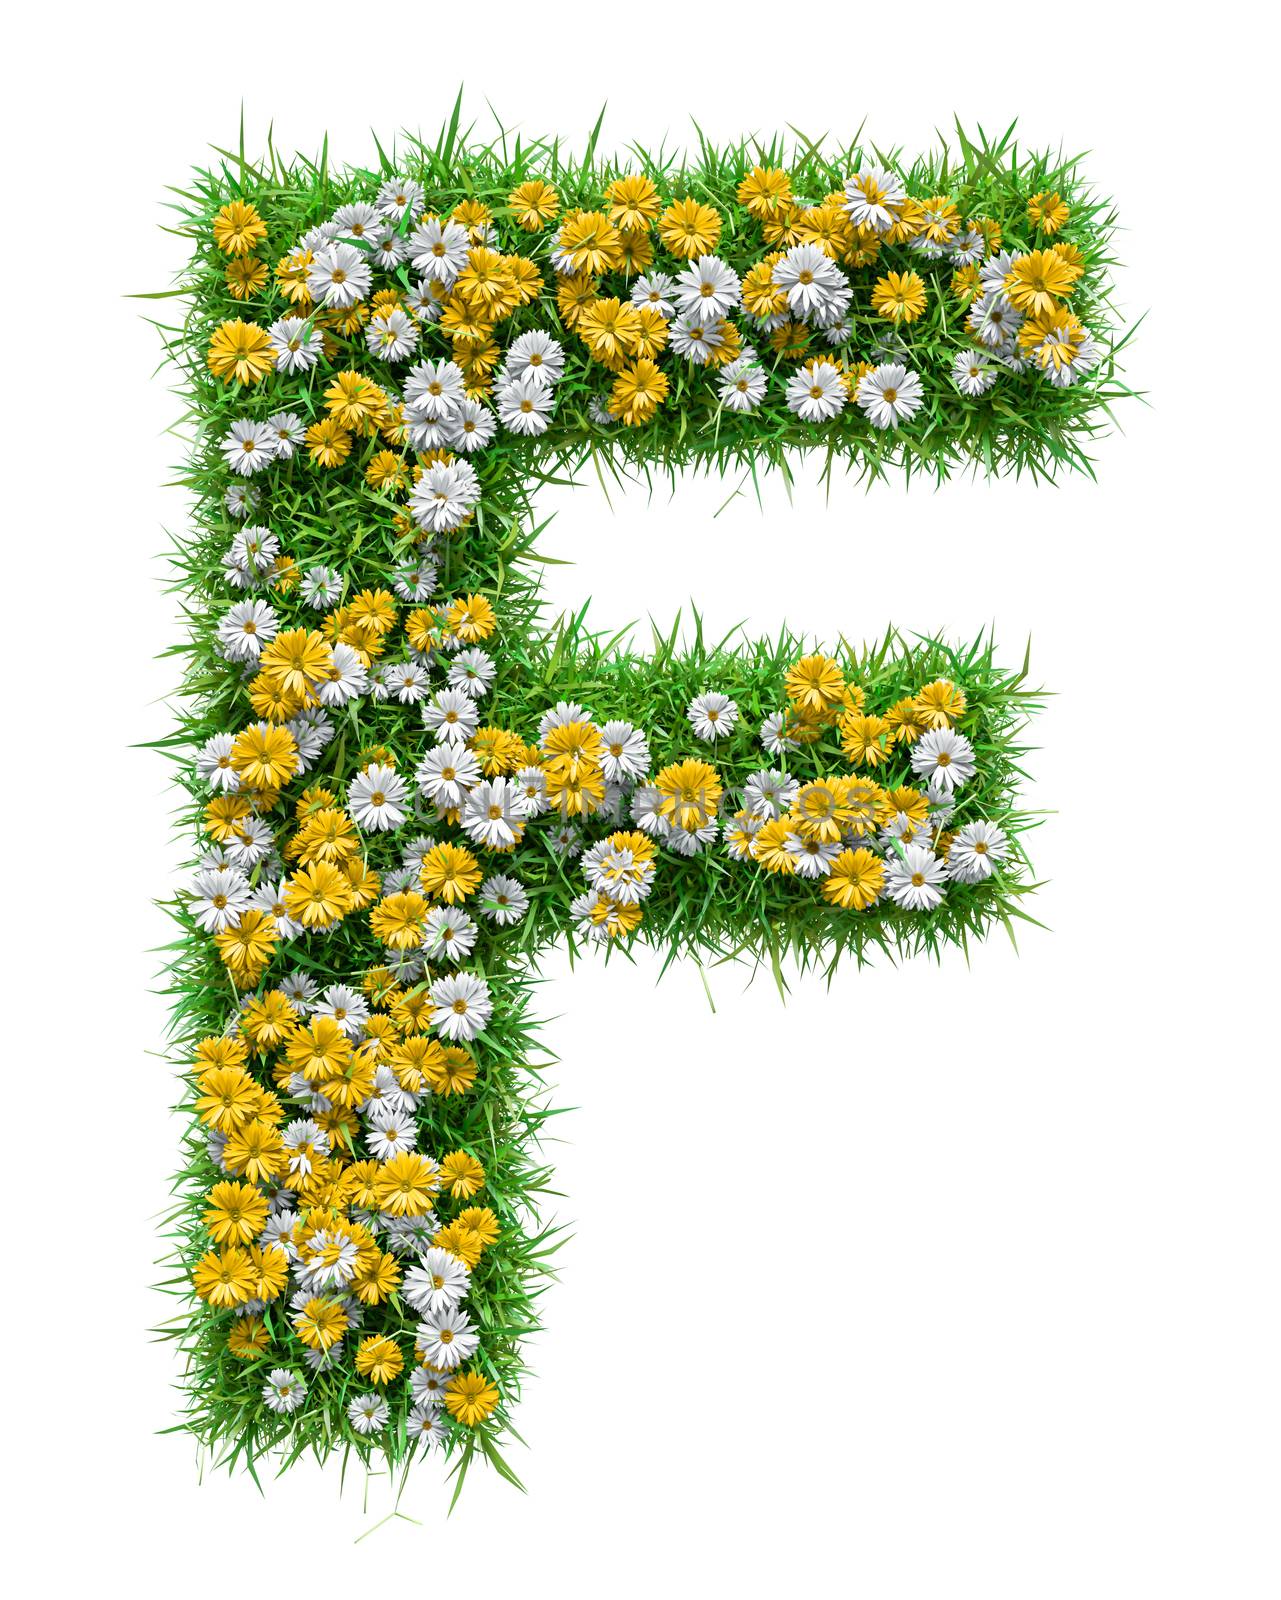 Letter F Of Green Grass And Flowers by cherezoff